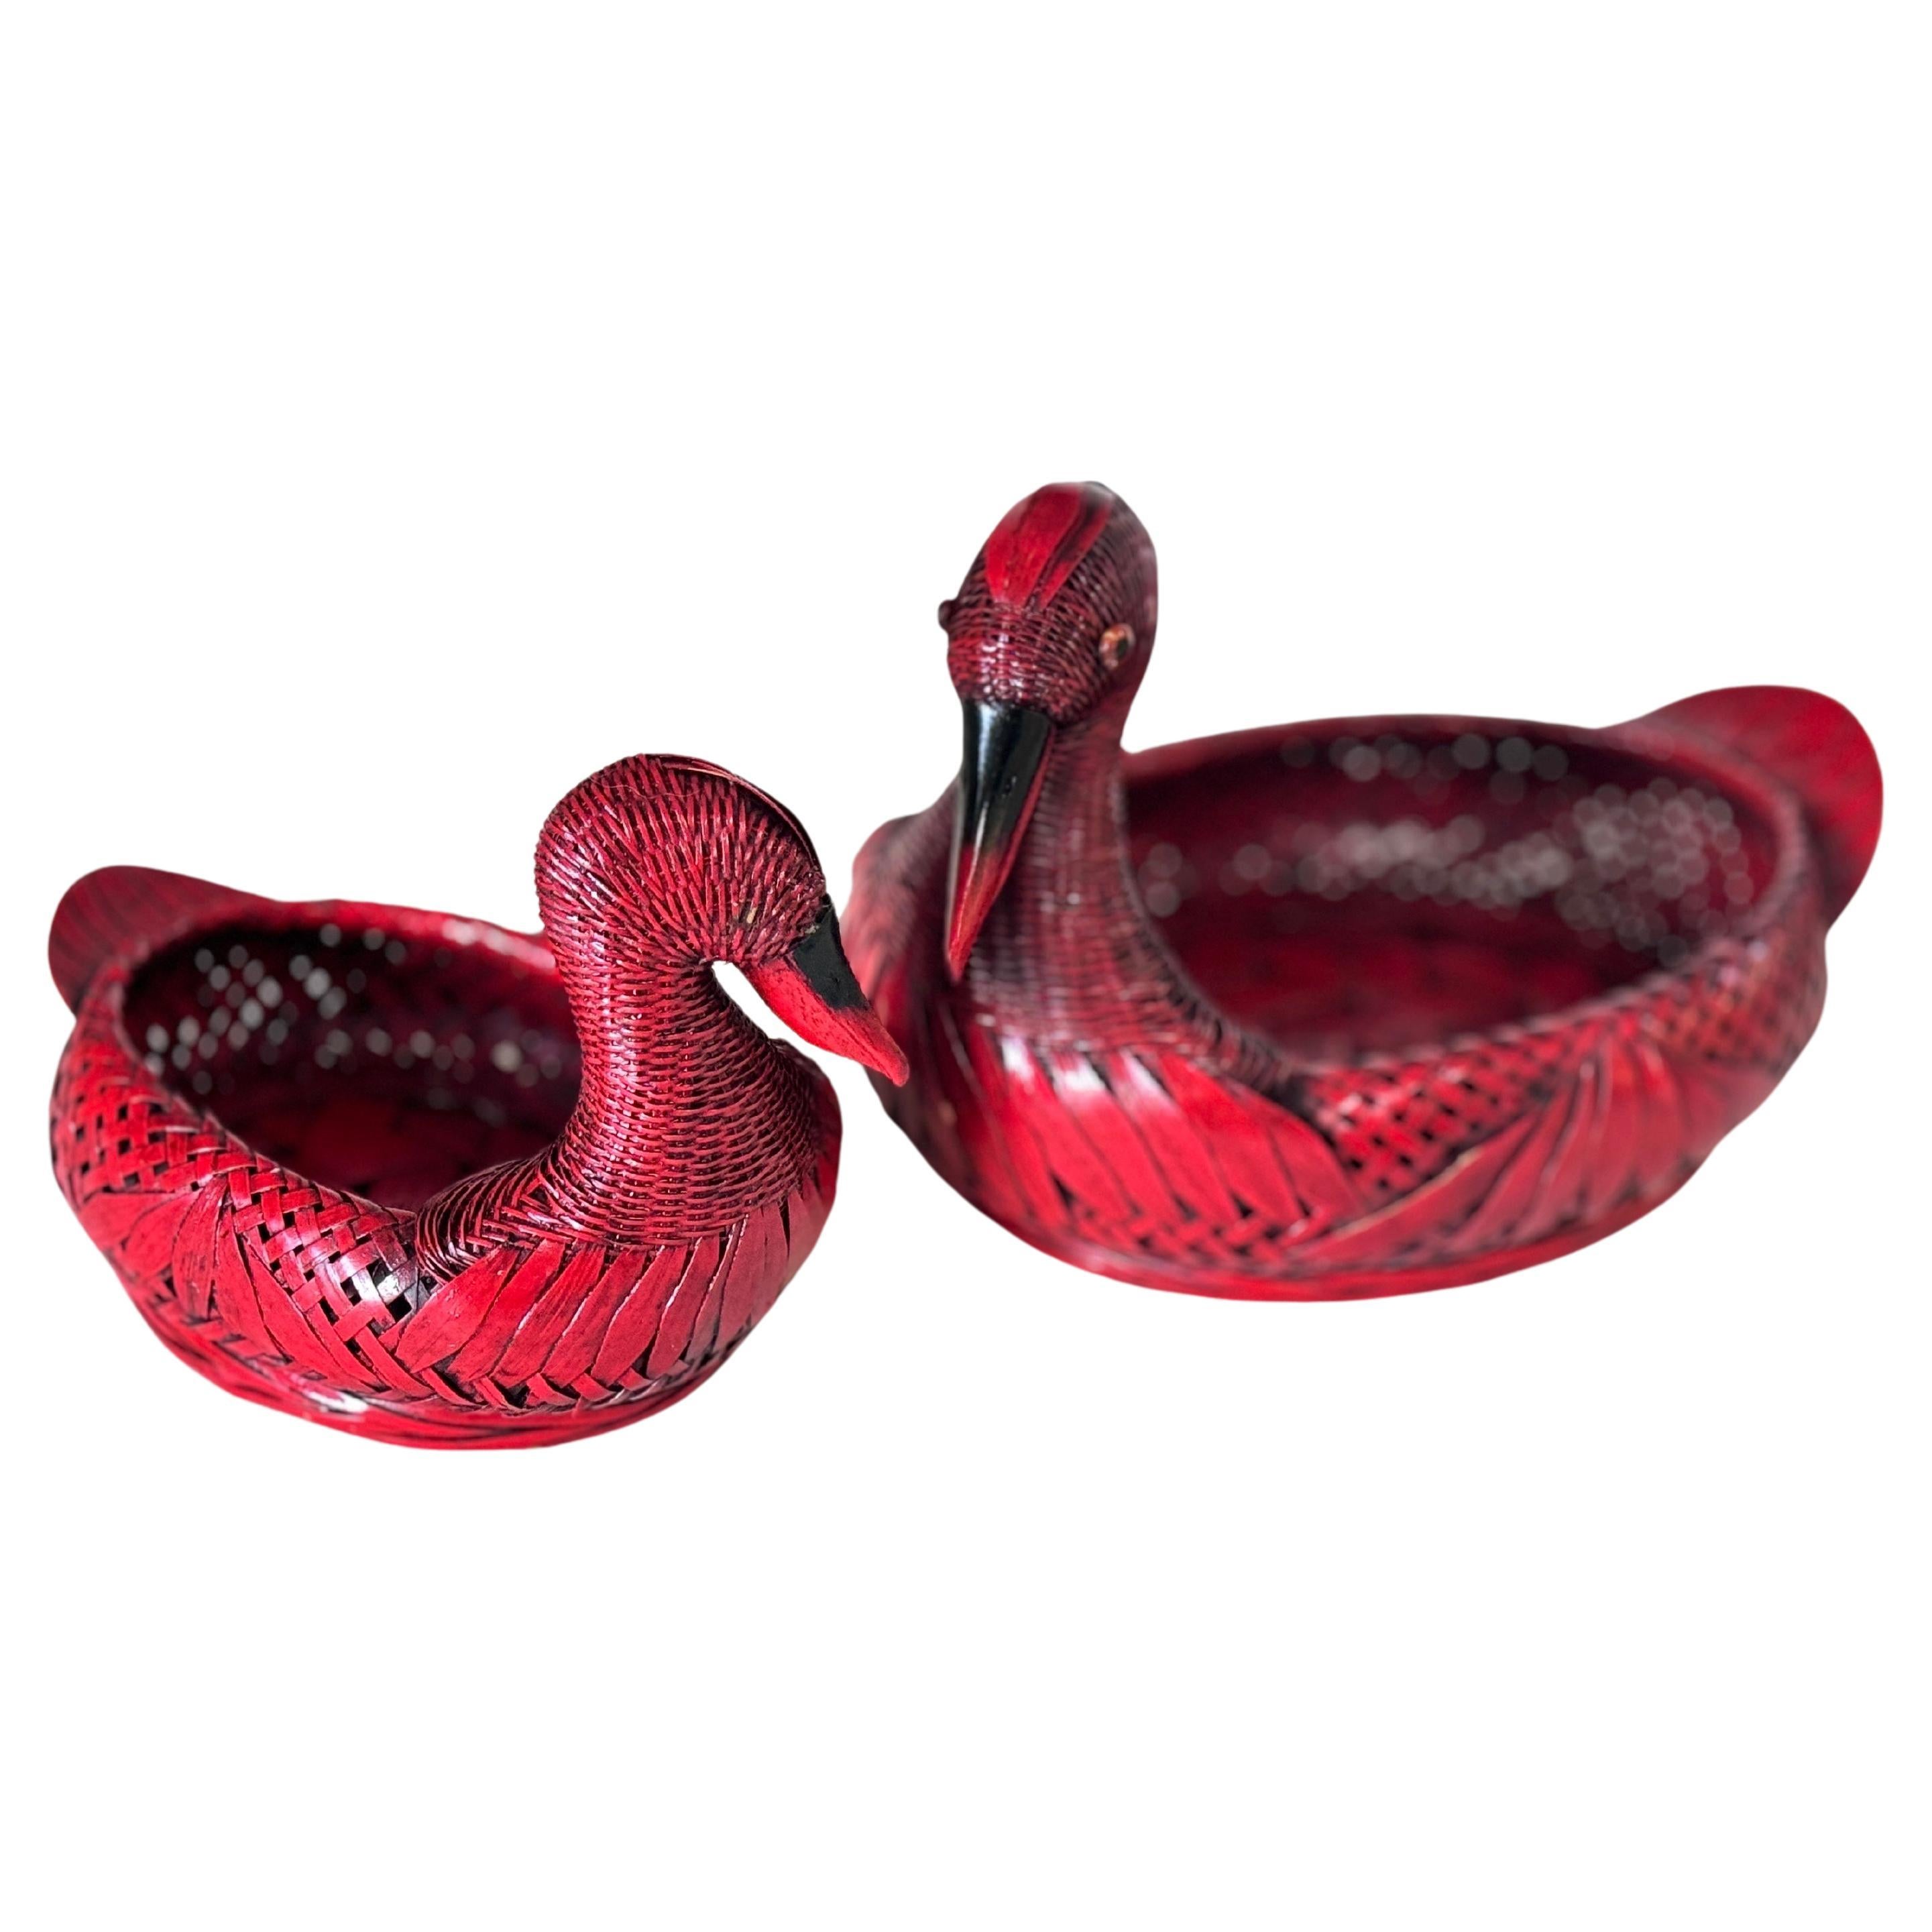 Vide Poches or Decorative Baskets Duck Sculptures Shaped in Rattan Italy 1970s For Sale